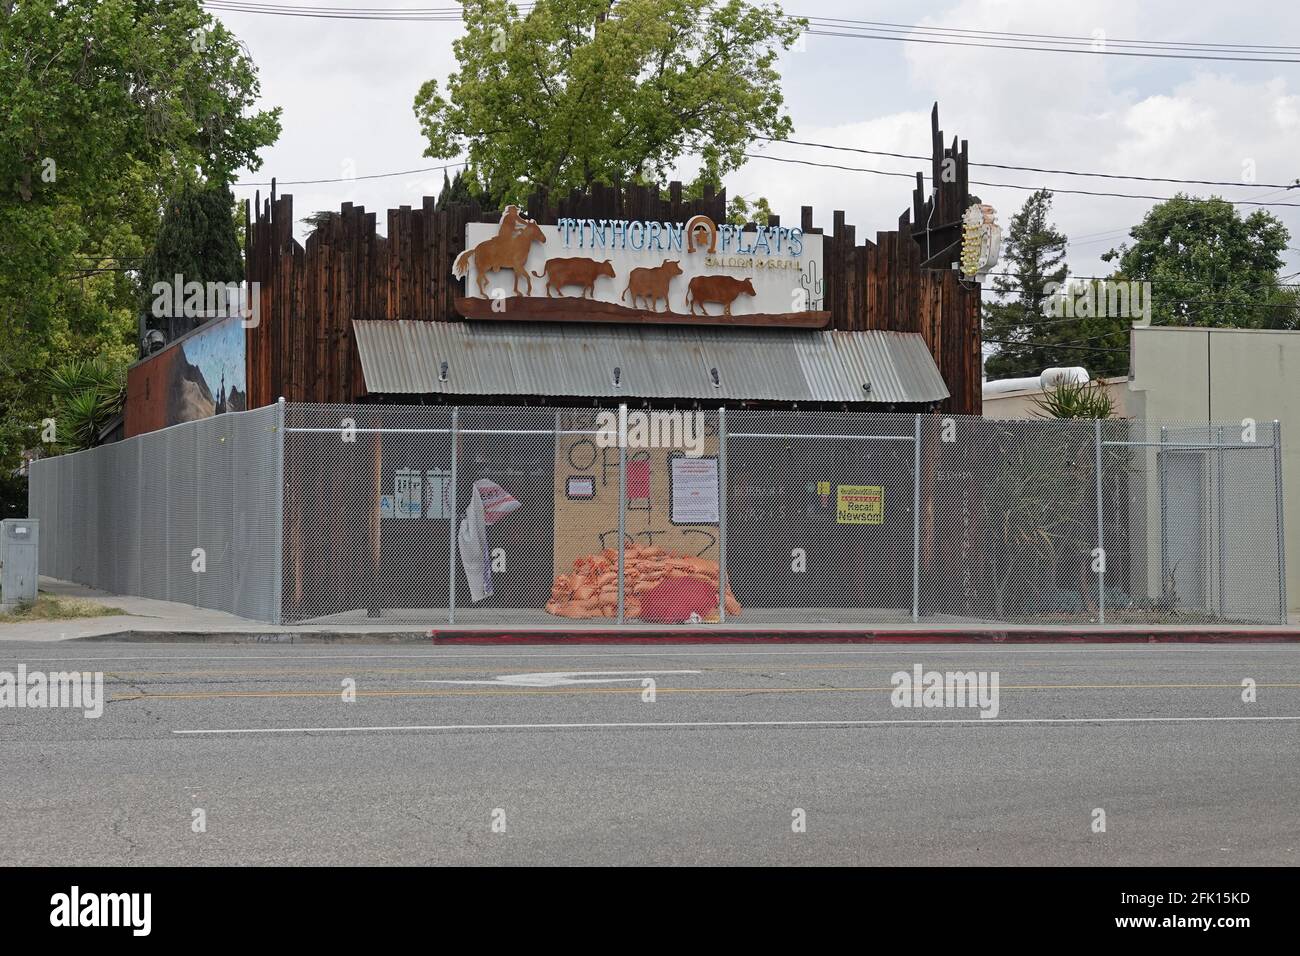 Burbank, CA / USA - April 25, 2021: Tinhorn Flats Saloon & Grill is shown  boarded up and surrounded by a chain-link fence installed by city officials  Stock Photo - Alamy